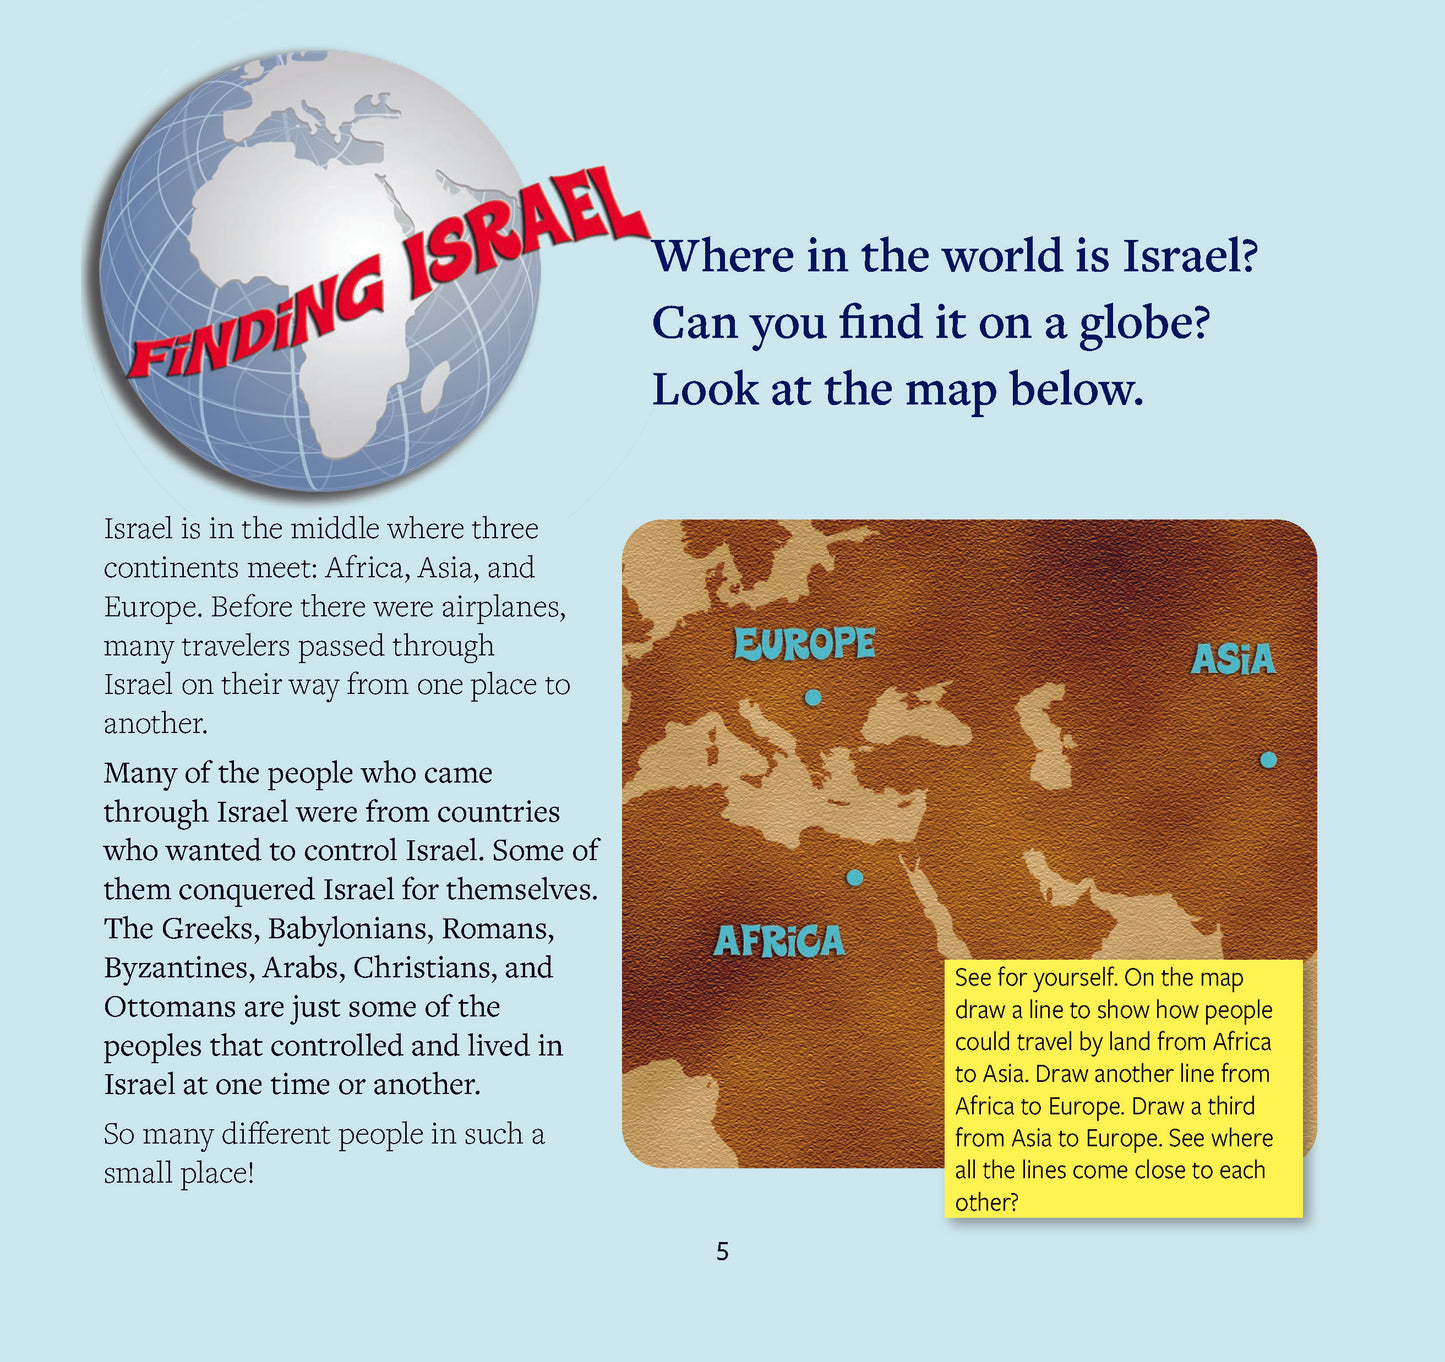 Yisrael Sheli: My Israel People and Places